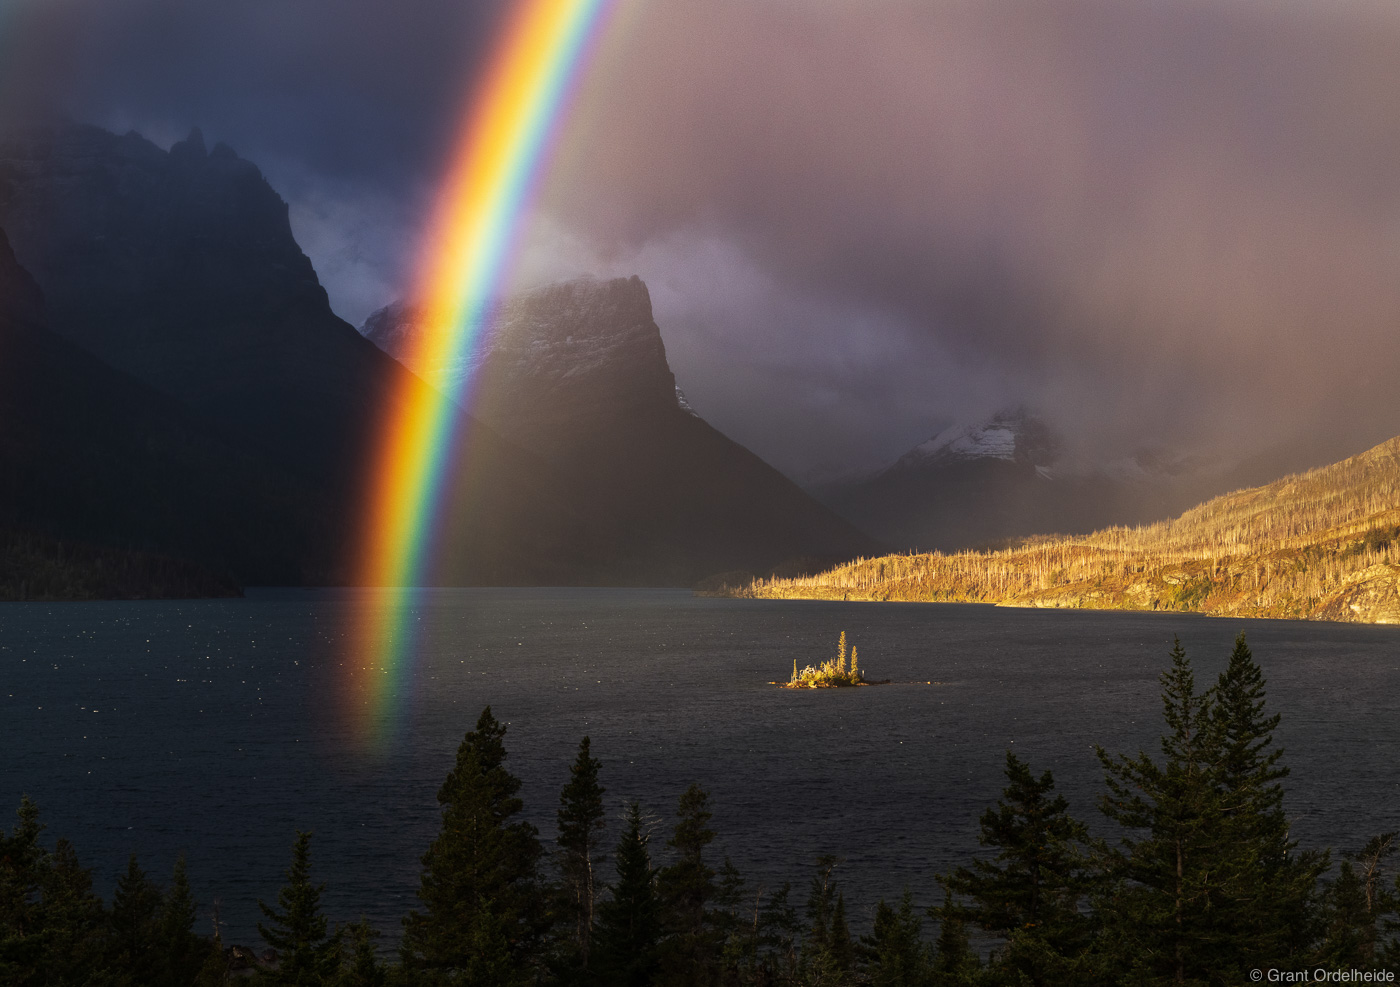 An incredibly vivid rainbow over Wild Goose Island and St. Mary Lake in Montana's Glacier National Park.